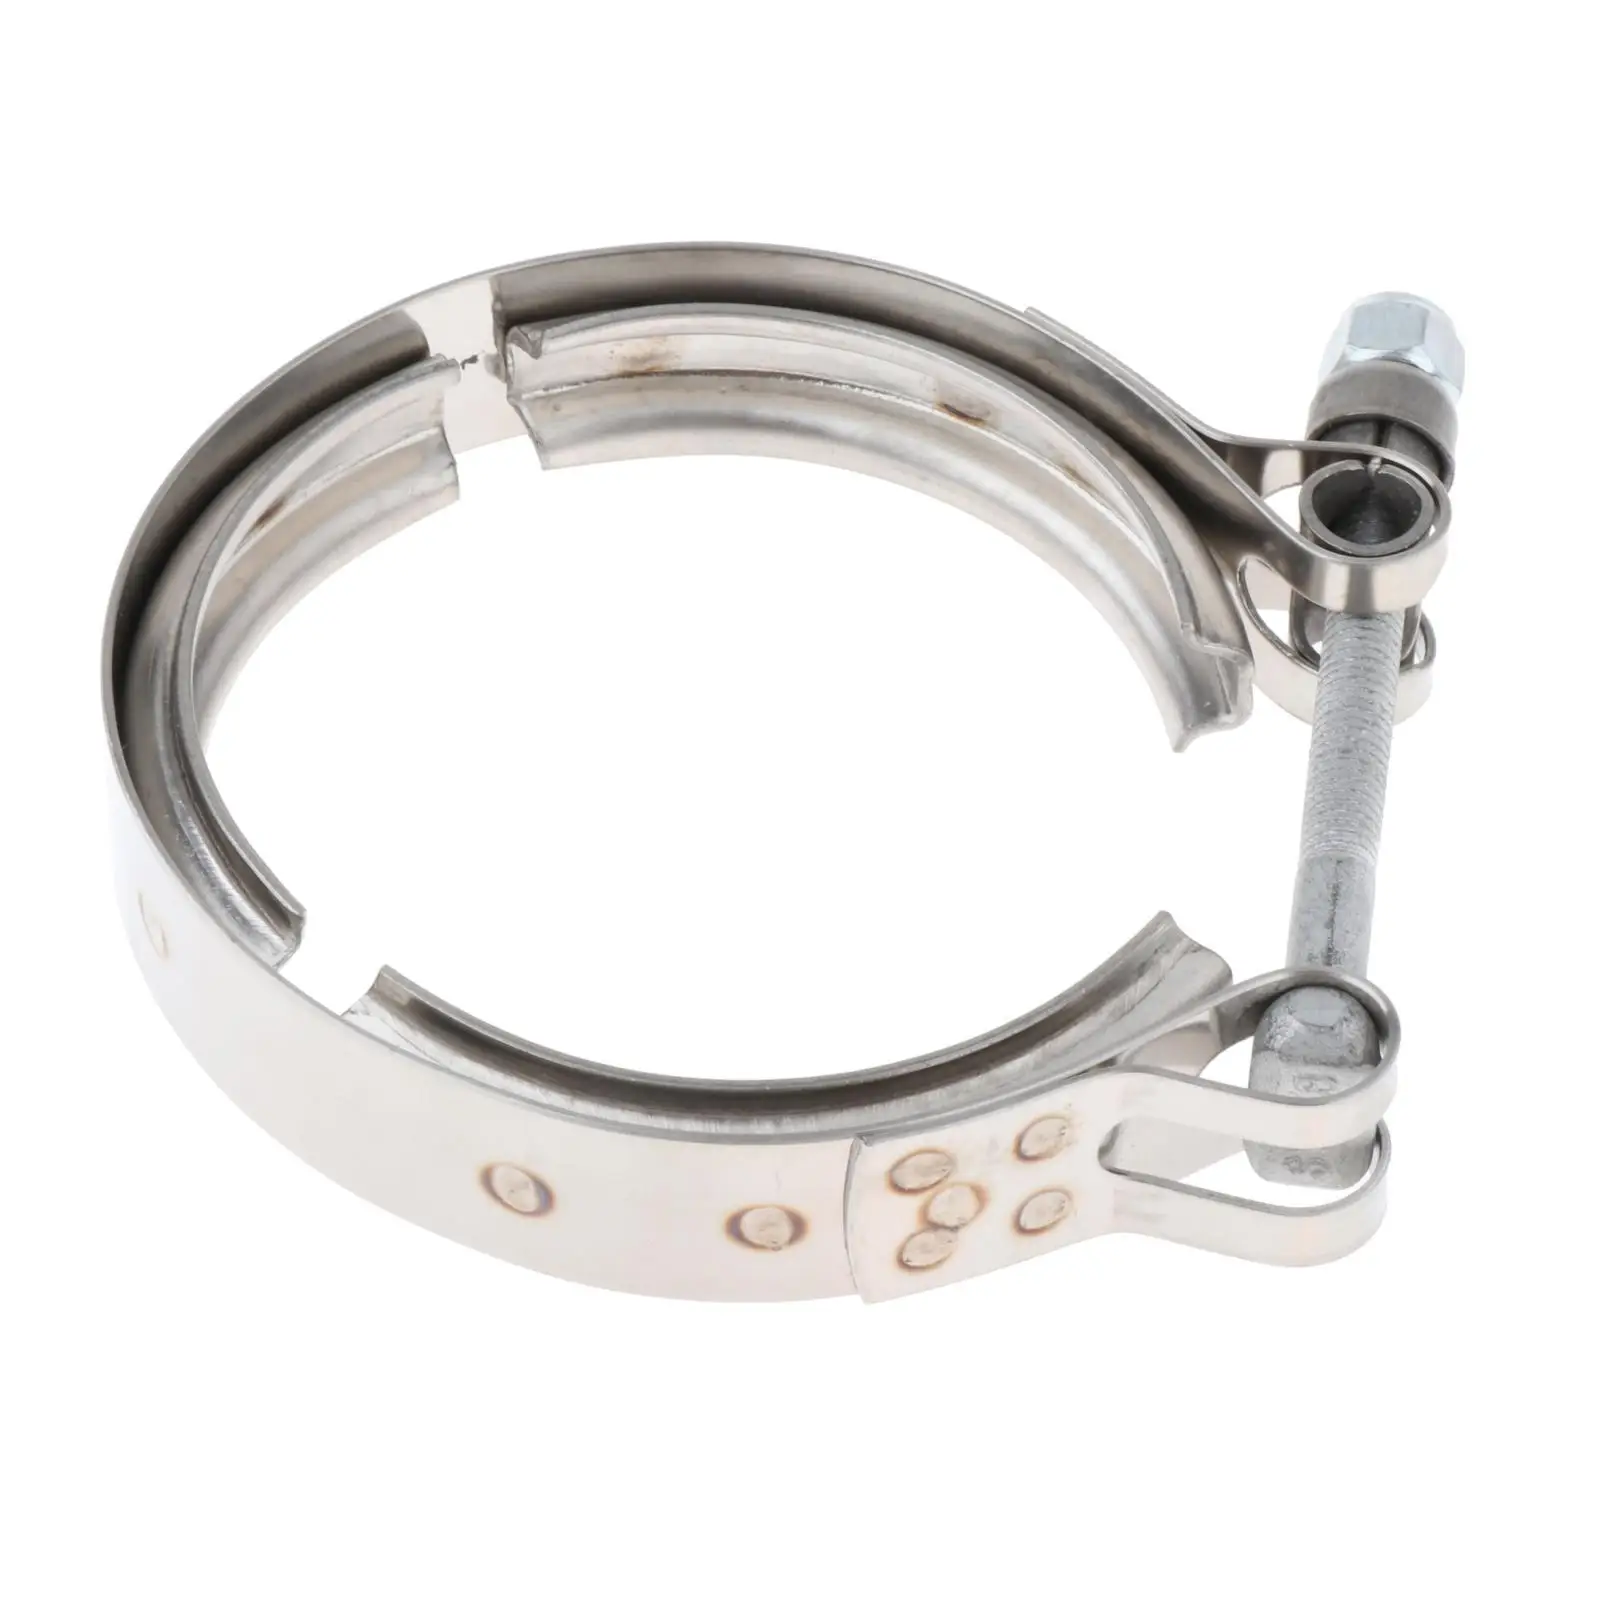 V Band Clip Good Sealing Performance Easy to Load and Unload Downpipe Exhaust Clamp for RAM 5.9 89-02 Replacement Tool